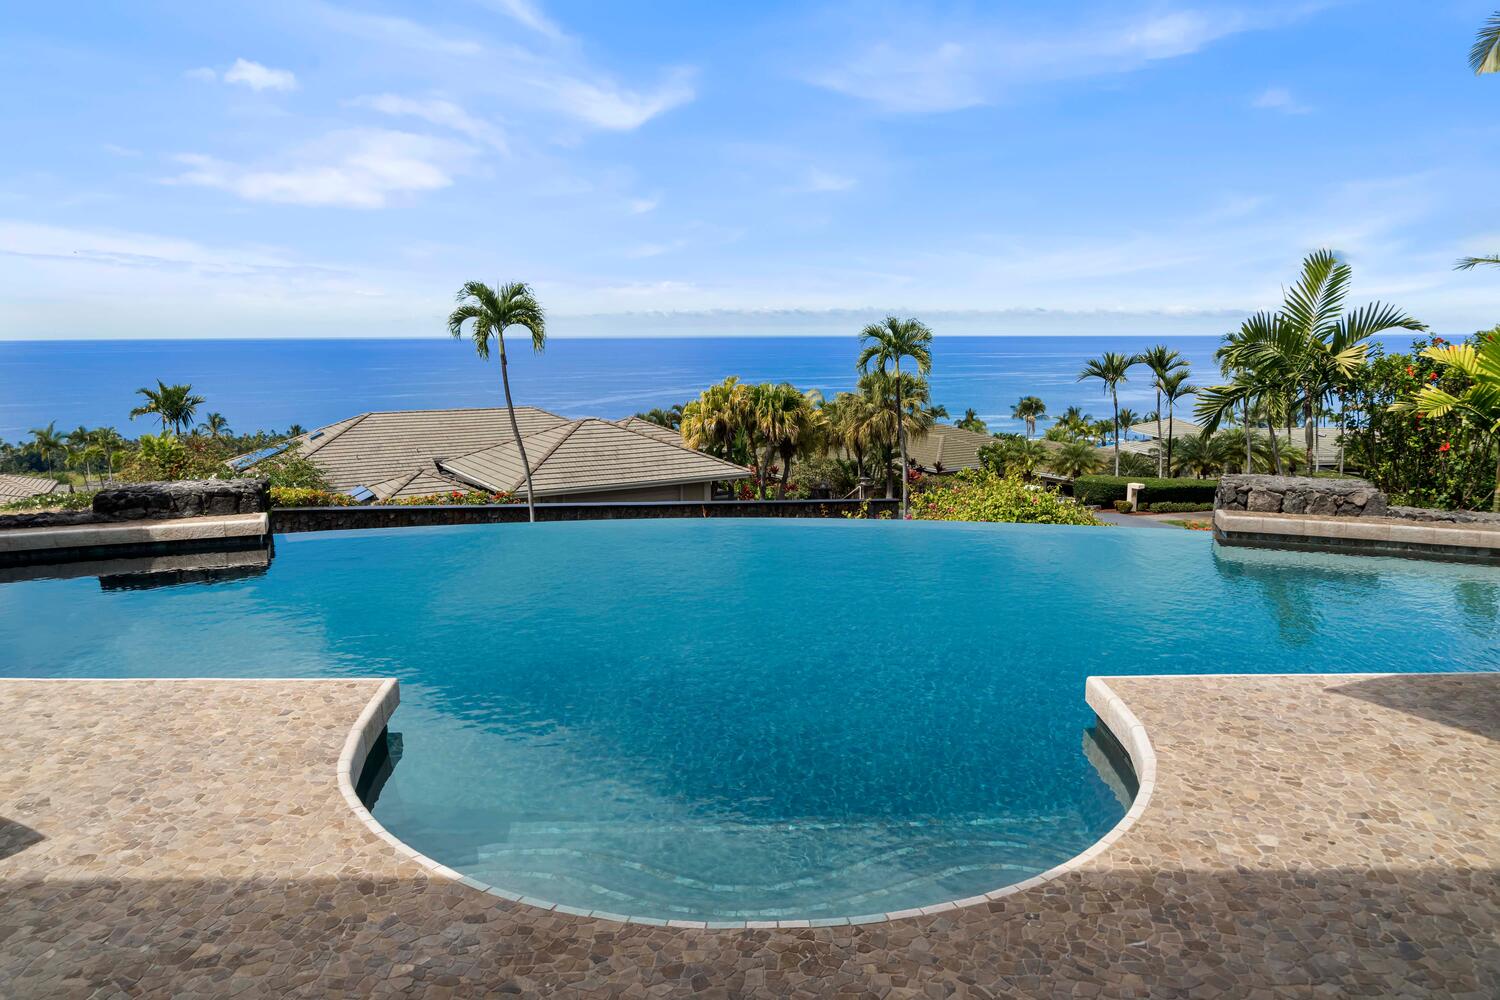 Kailua Kona Vacation Rentals, Island Oasis - Breathtaking view from the pool and Lanai